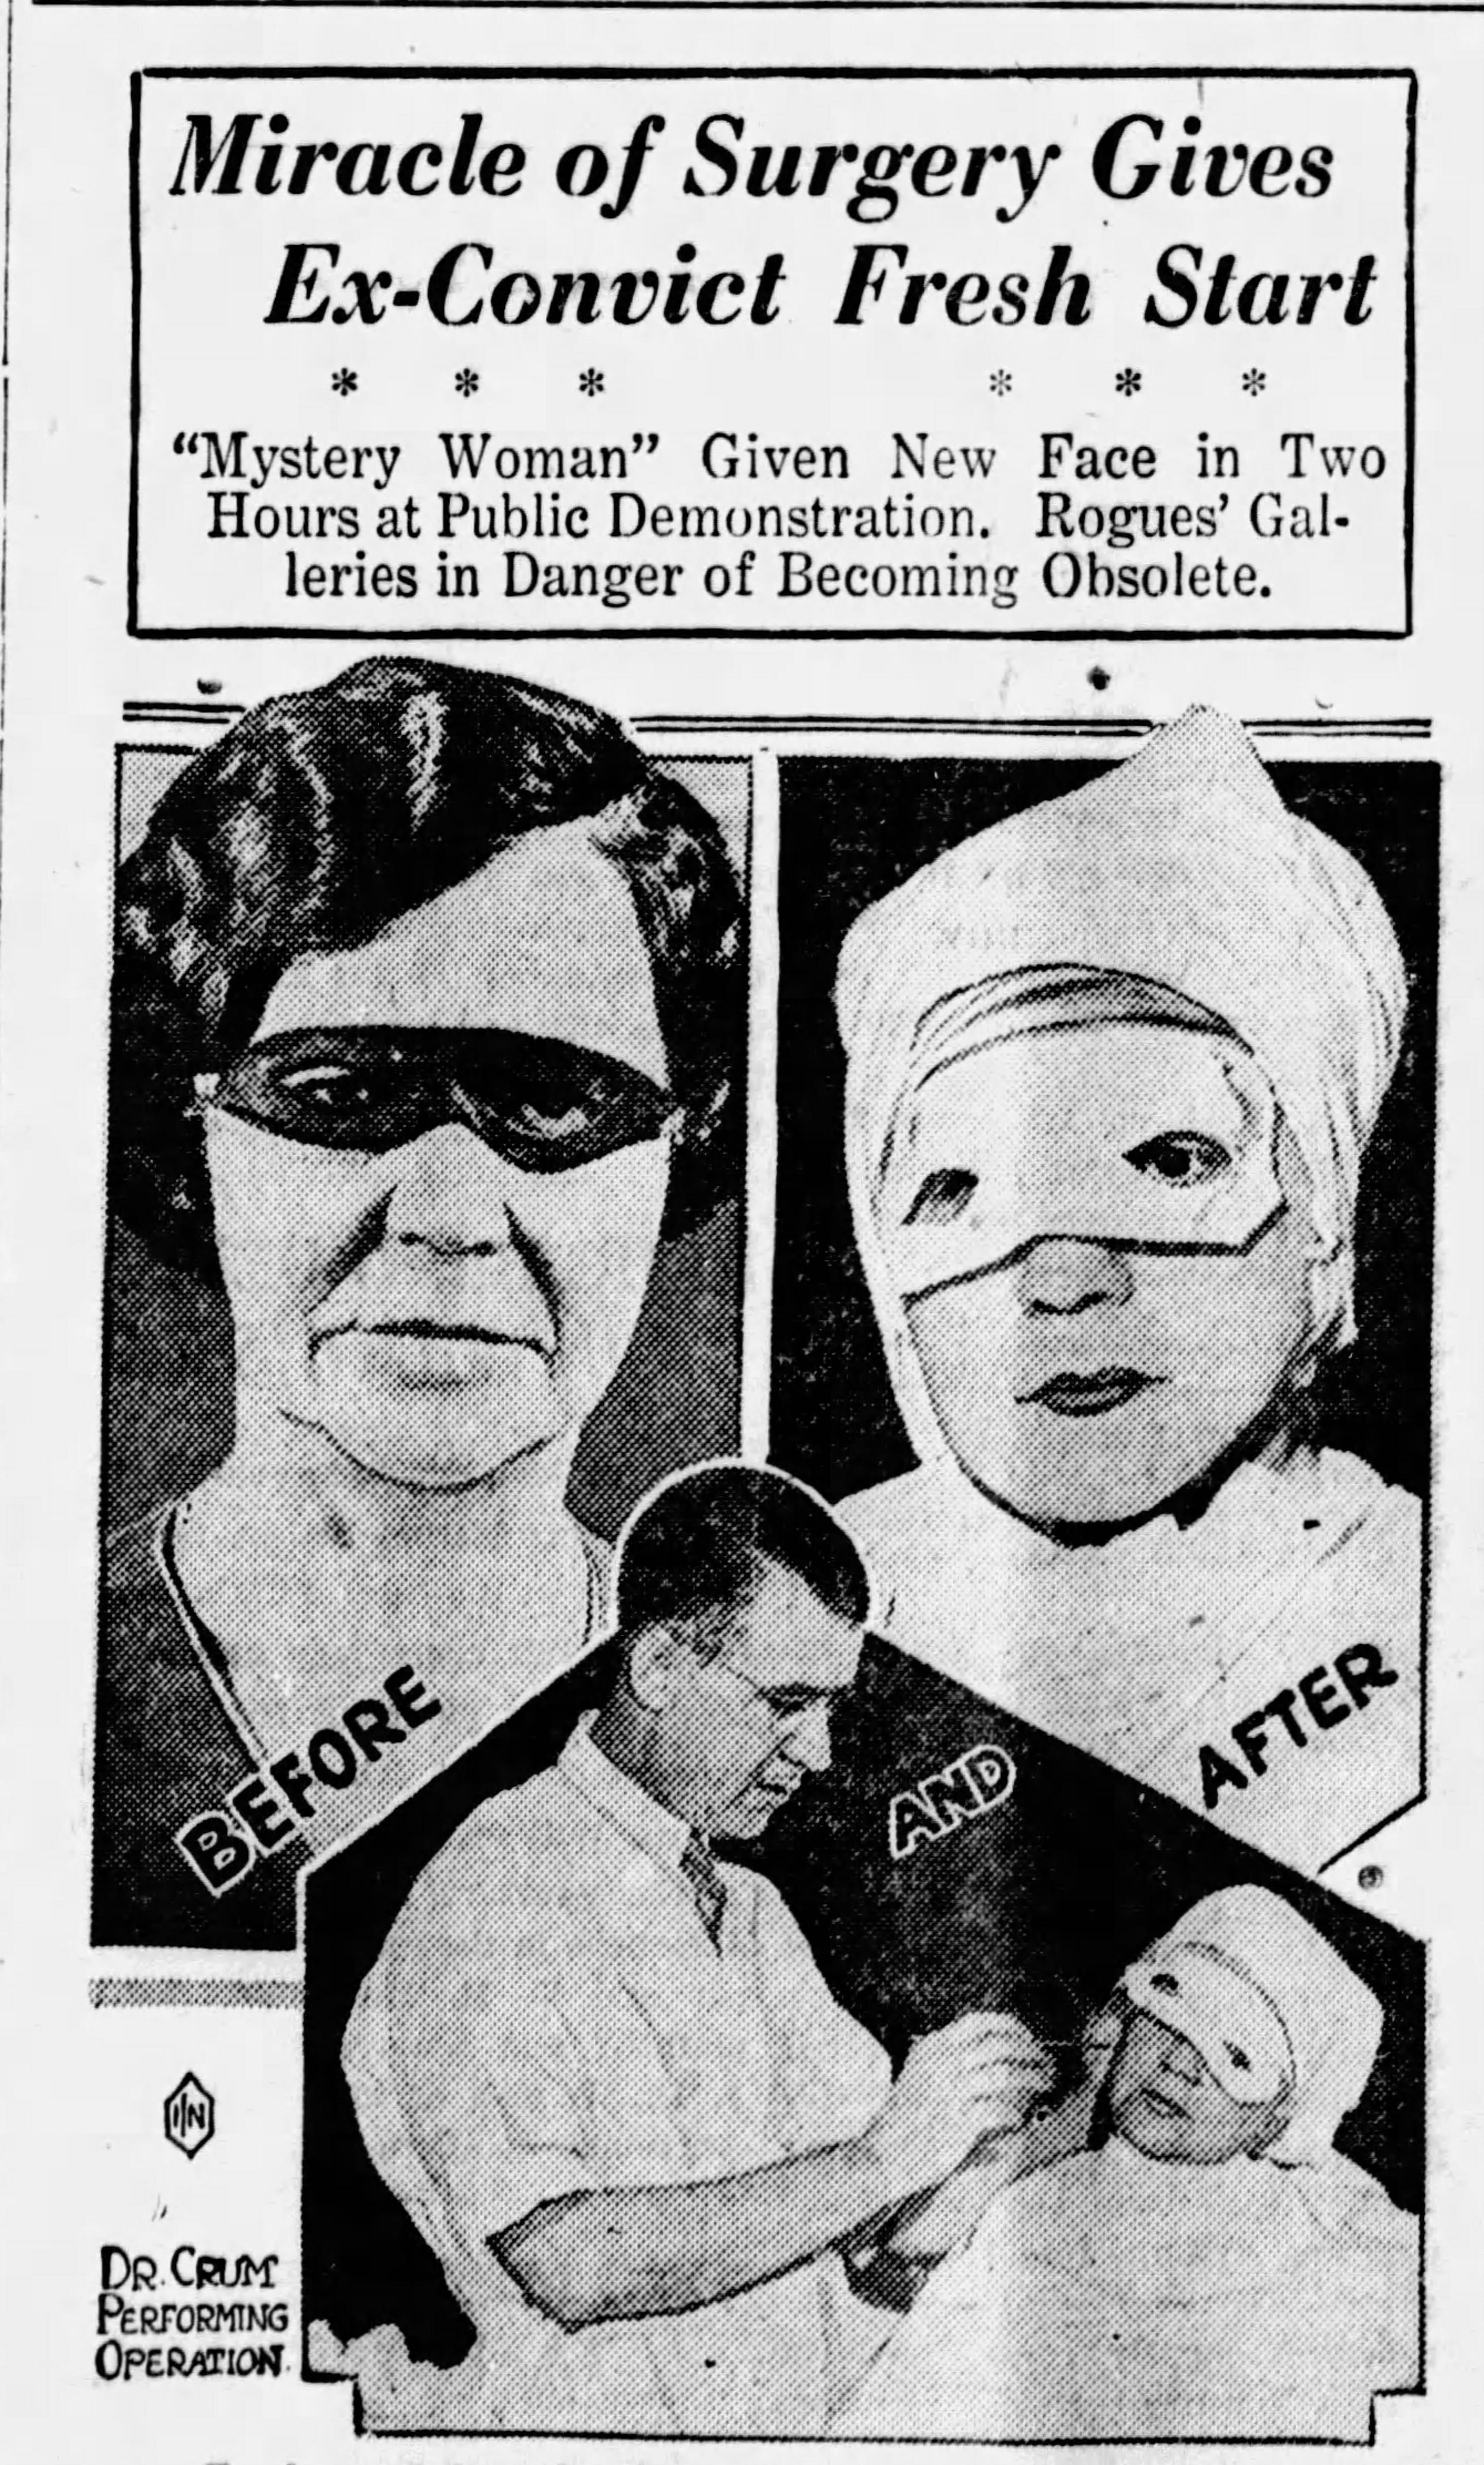 Newspaper clipping with headline 'Miracle of surgery gives ex-convict fresh start' and image of woman with eye mask.